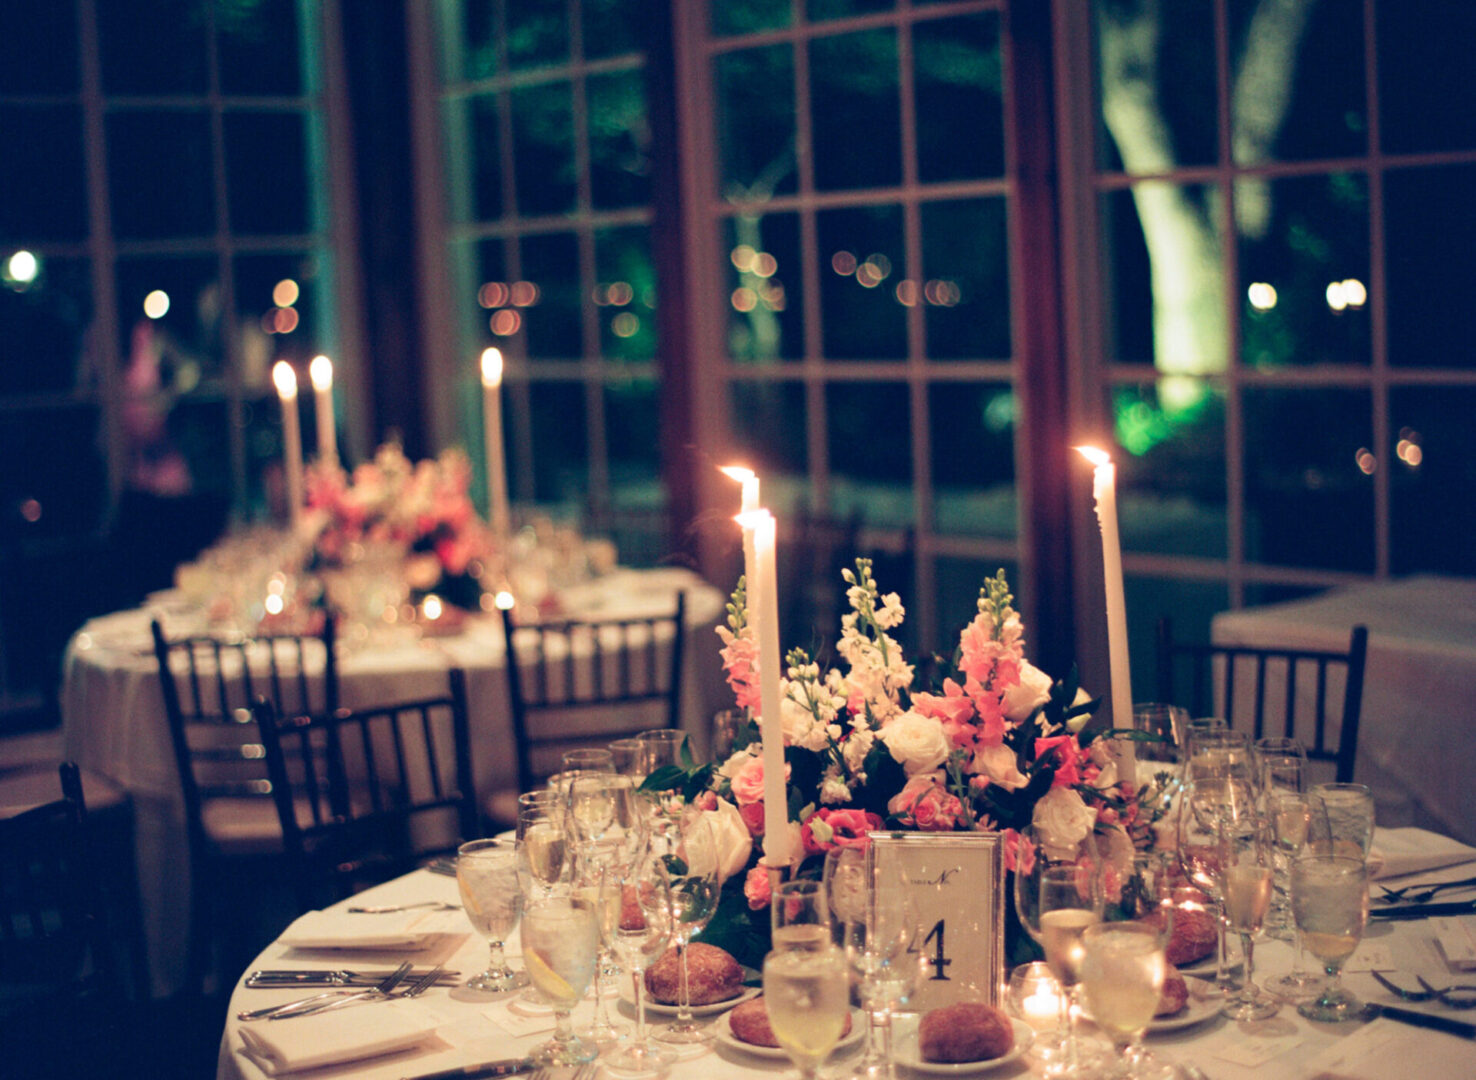 Decorated wedding tables with food and candles